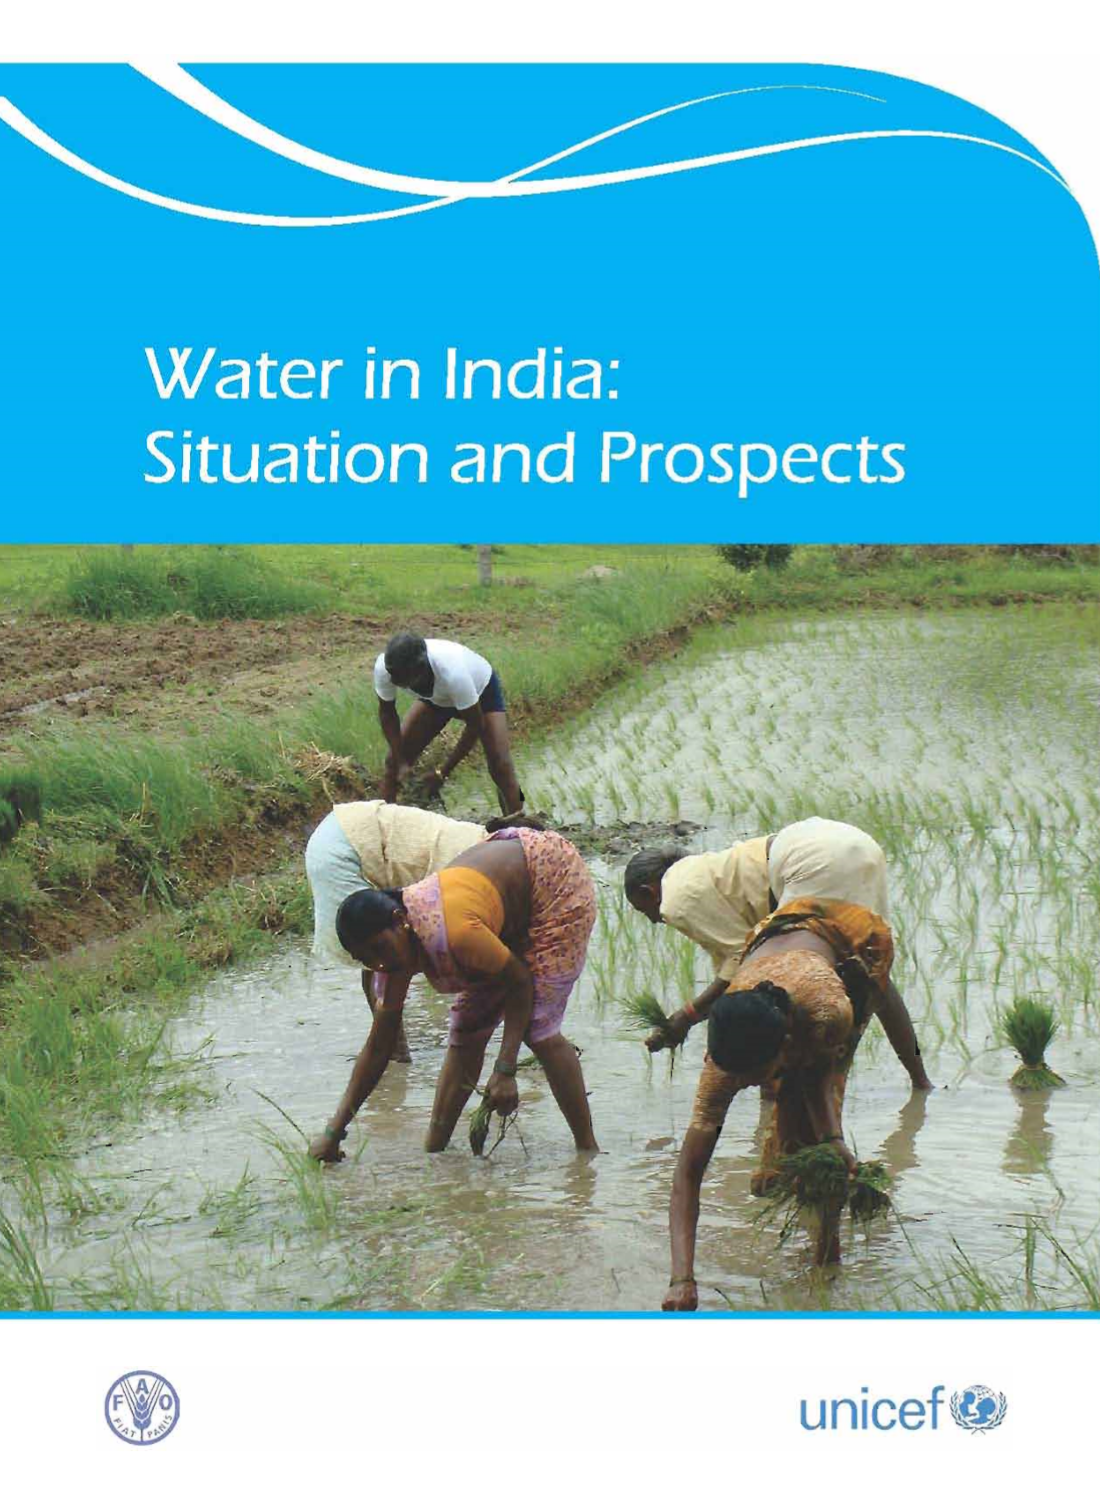 Water in India: Situation and Prospects